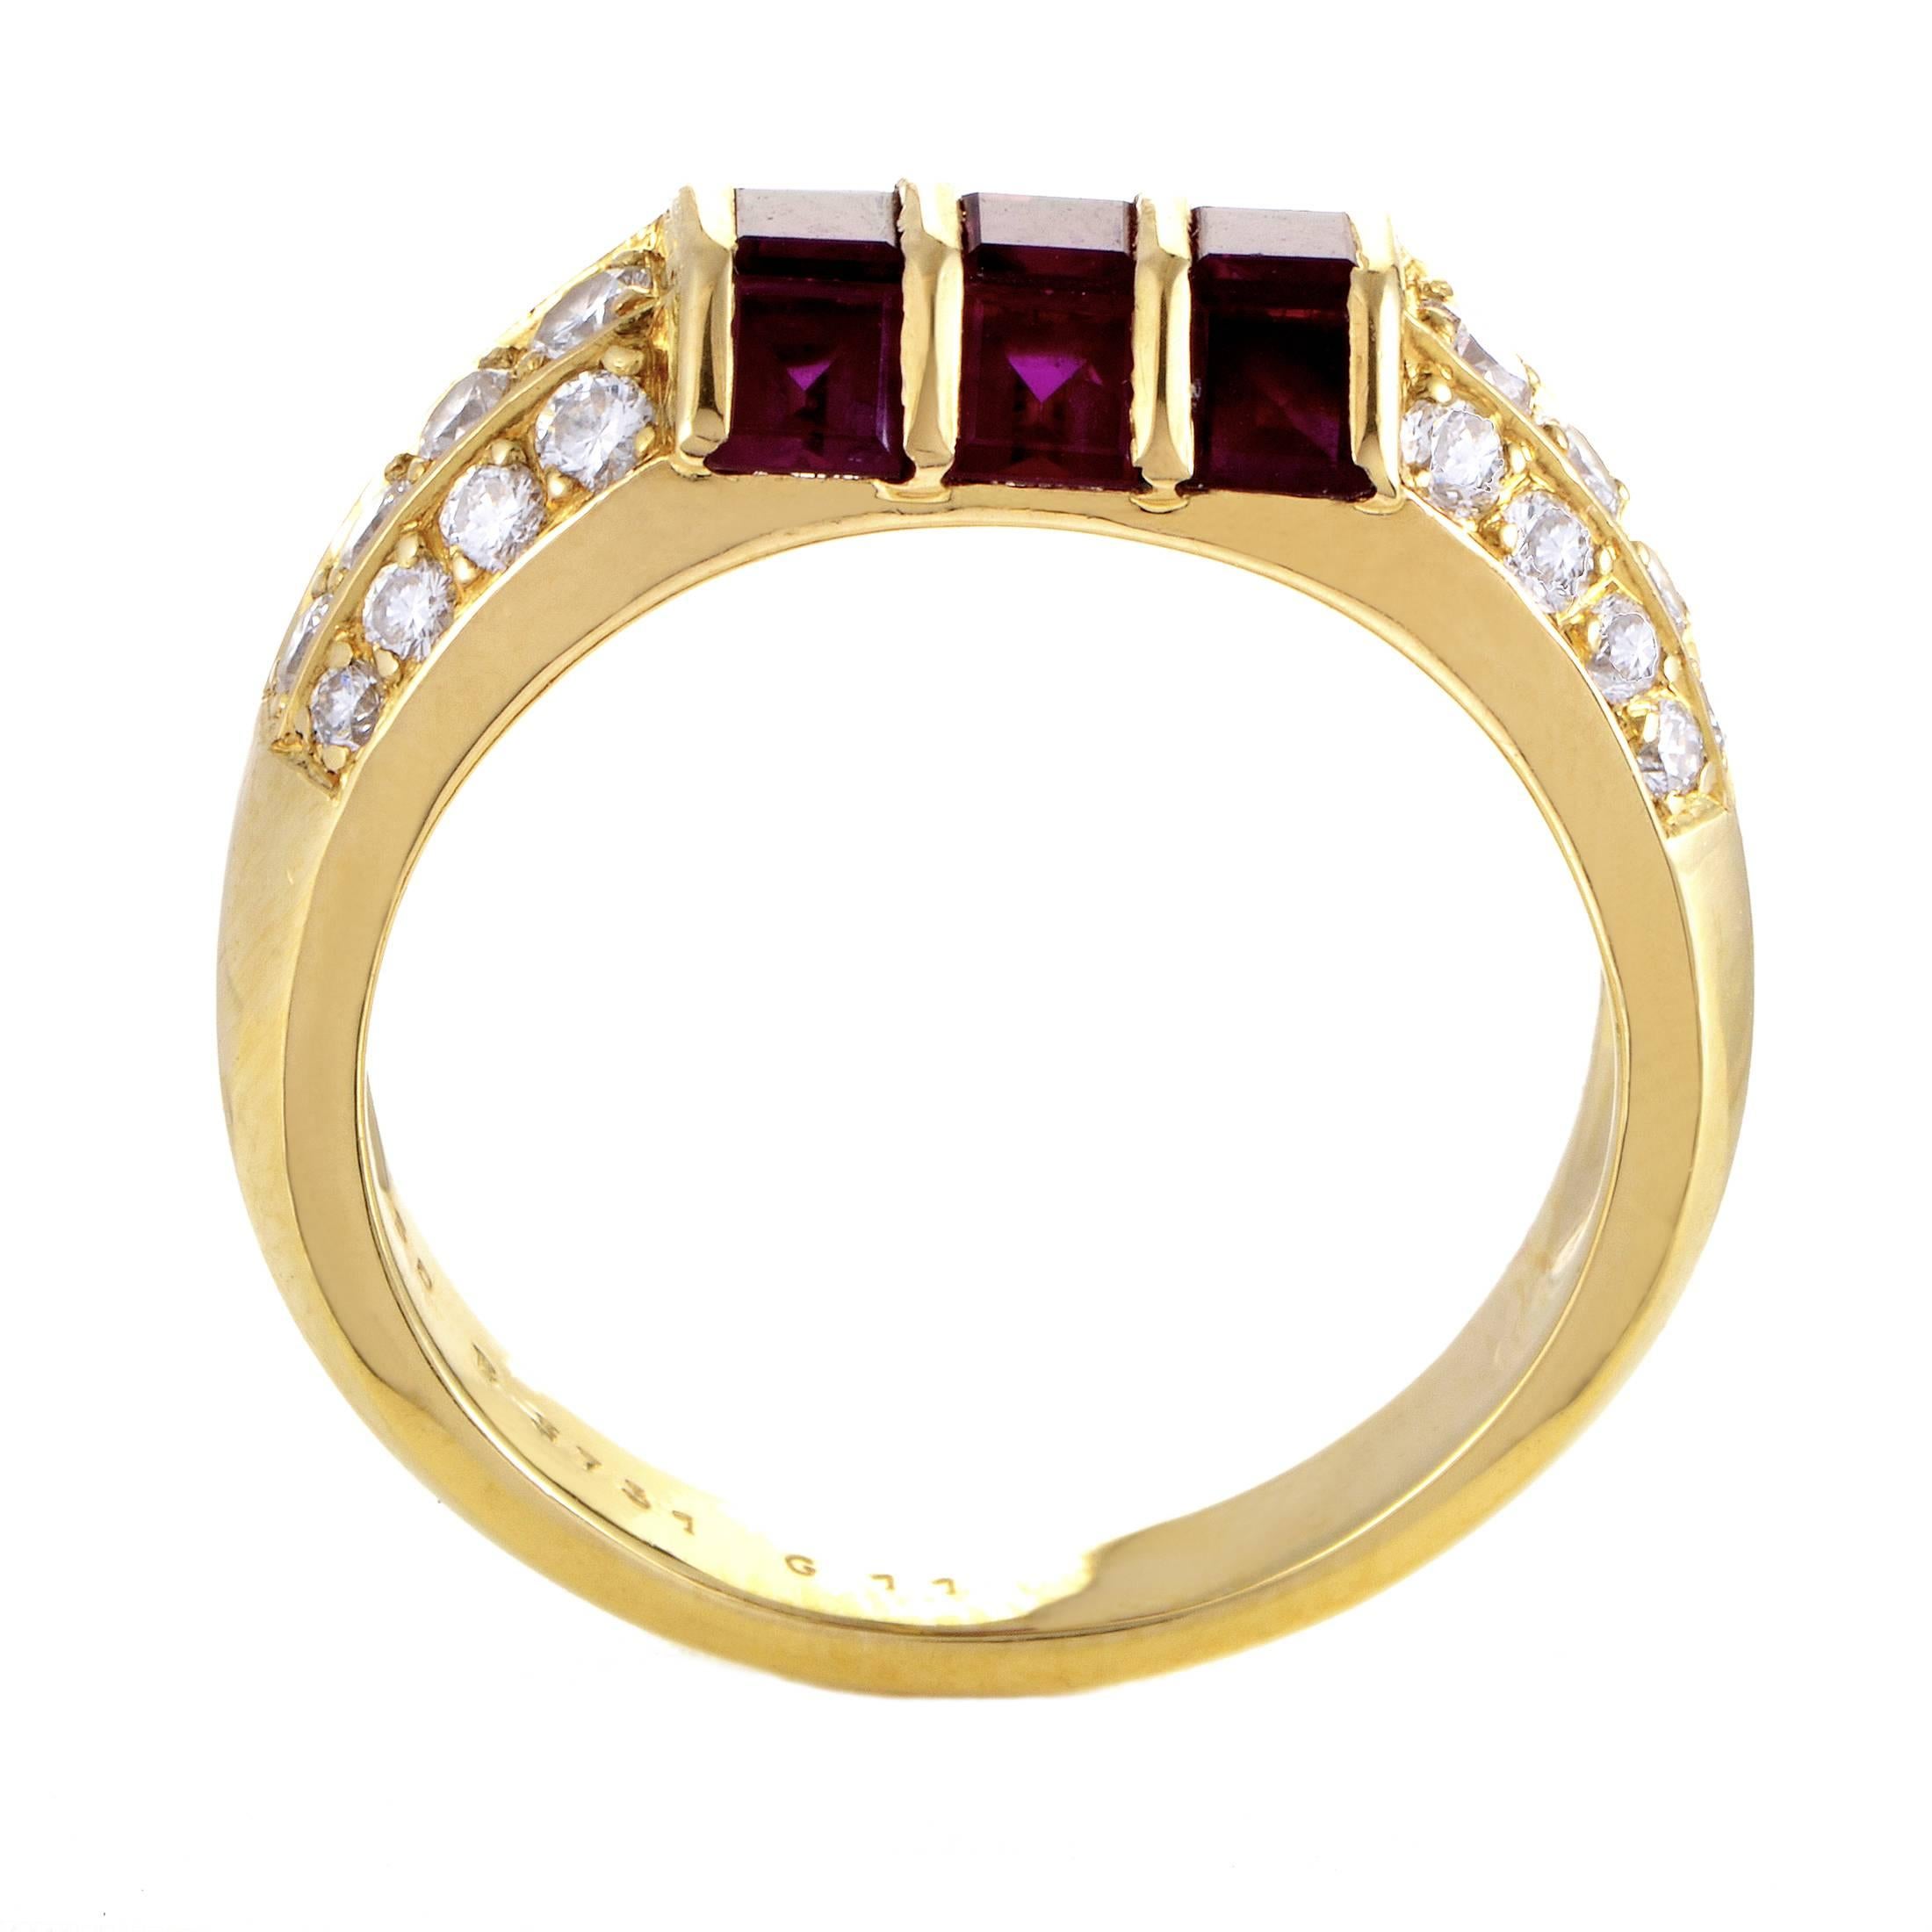 Leading up to the heart of the design where three gorgeous rubies totaling 1.10 carats are neatly set upon 18K yellow gold, the F-color diamonds of VVS clarity weighing in total 0.65ct add their charming luster to this nifty ring from Van Cleef &